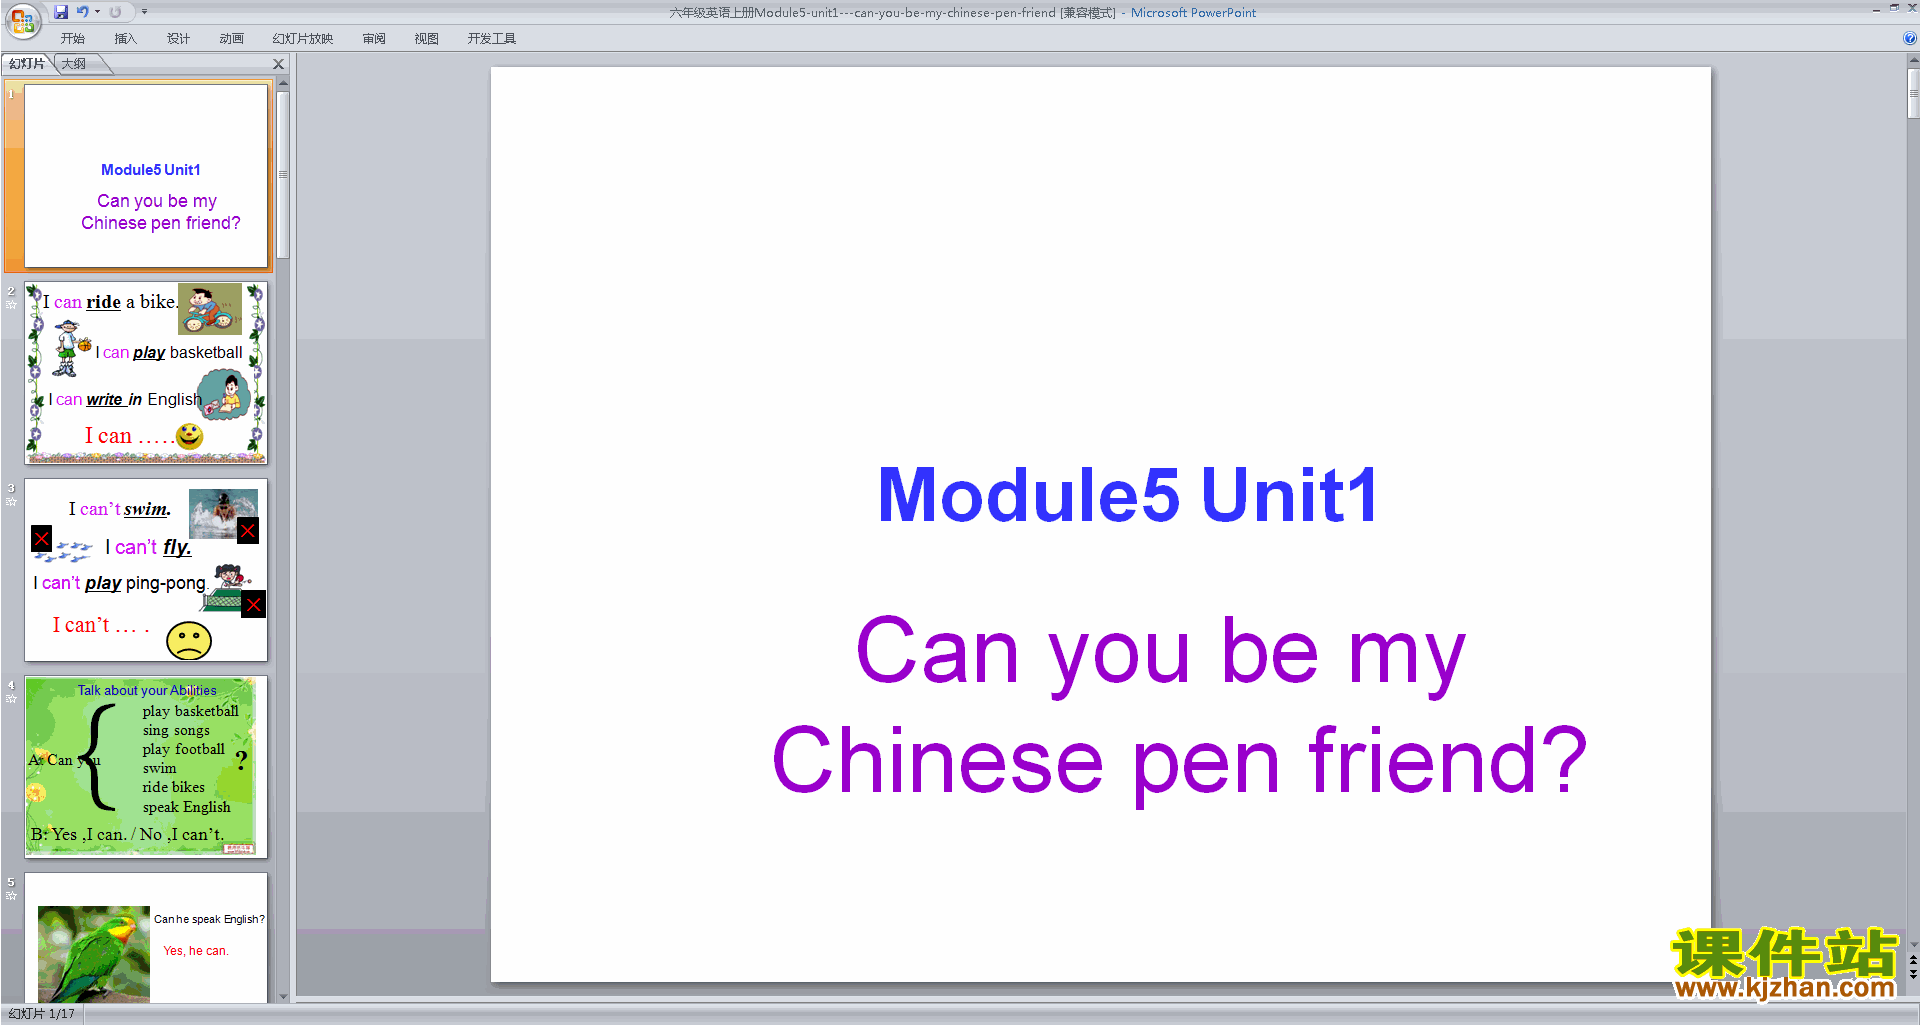 Module5 Unit1 Can you be my Chinese pen friendаPPT